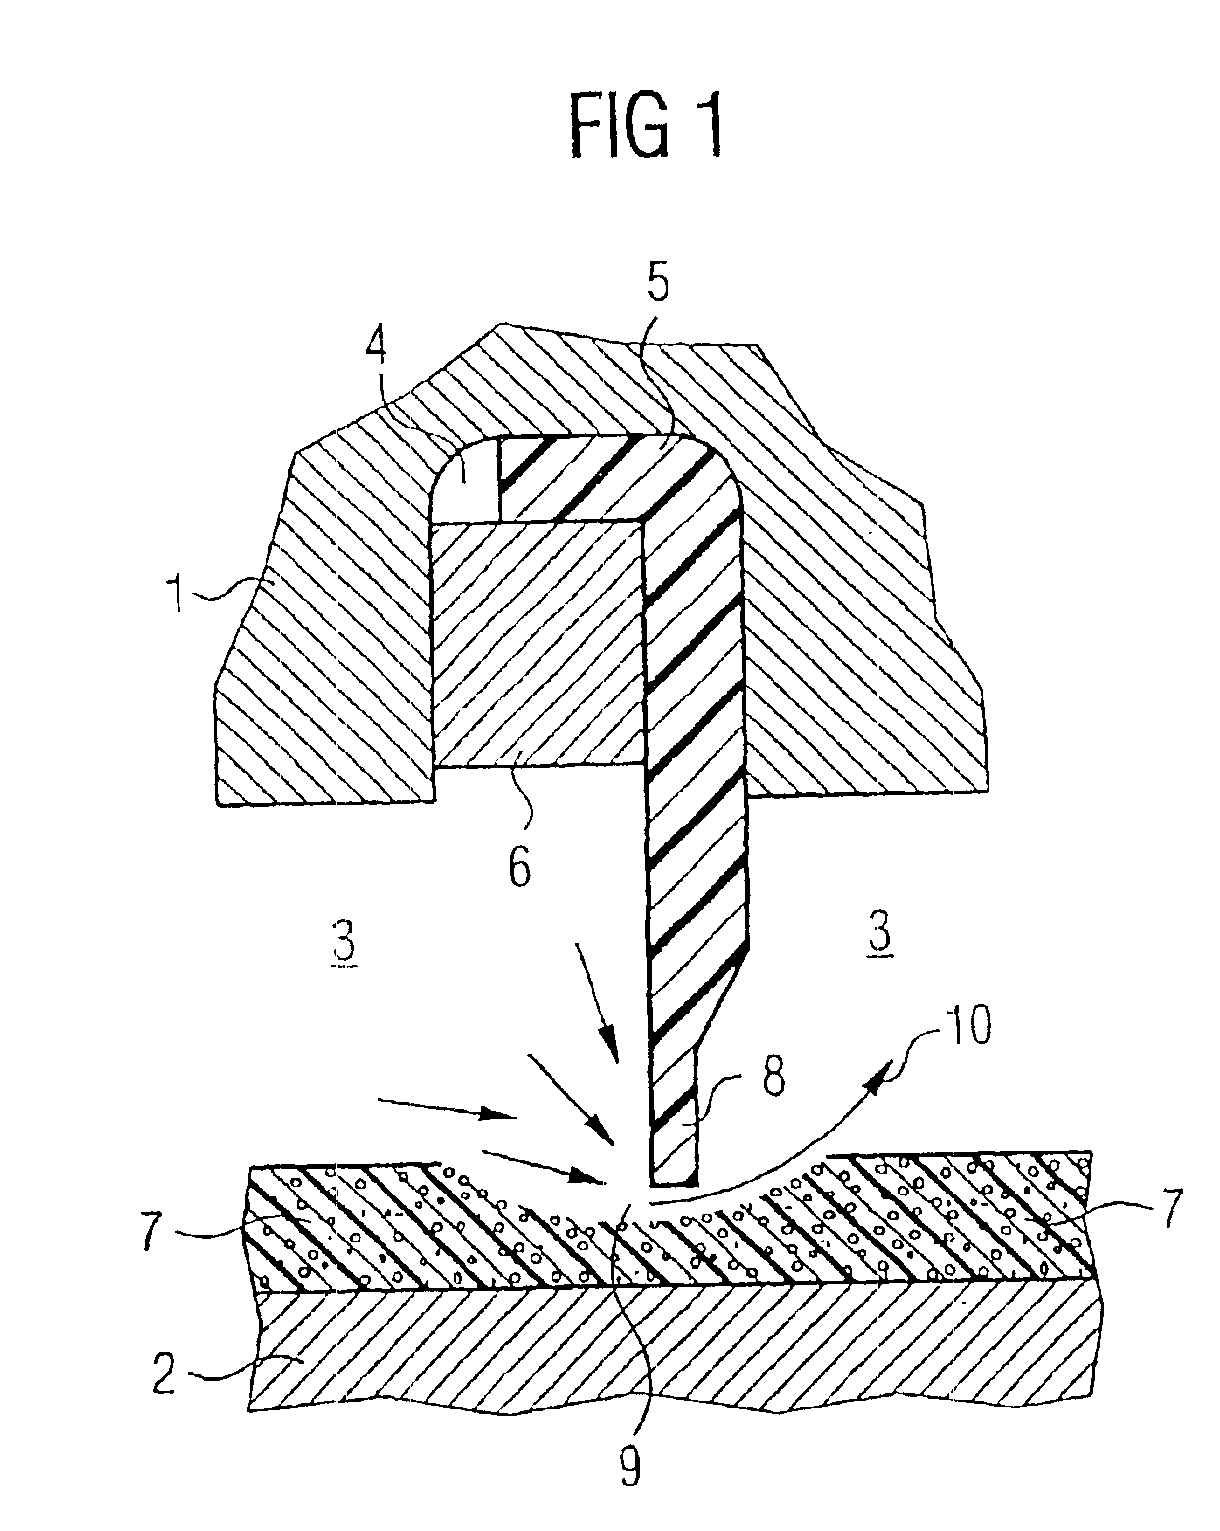 System for sealing off a gap